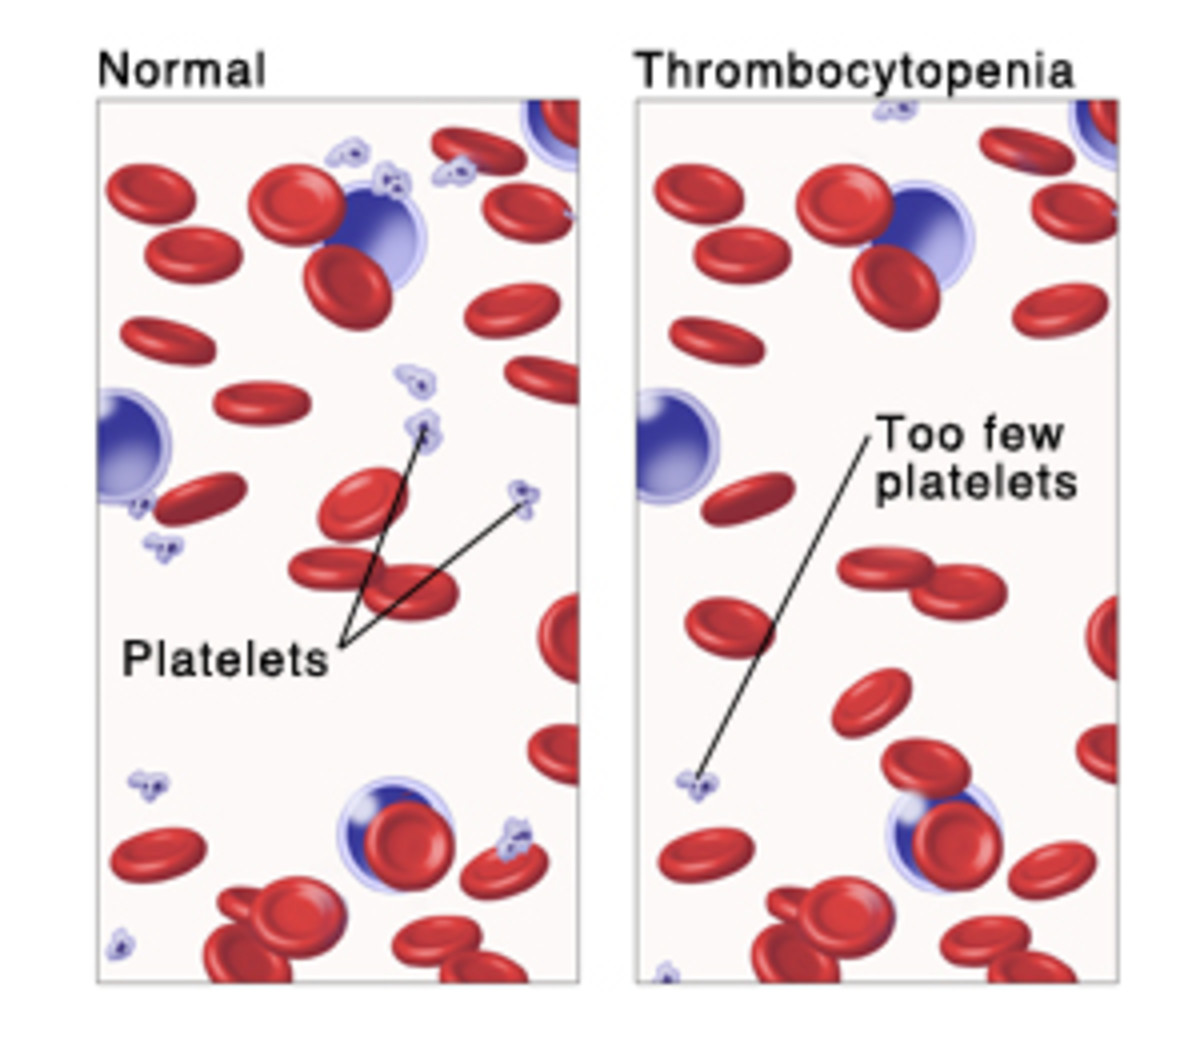 There are fewer platelets in the blood of a patient with I. T. P